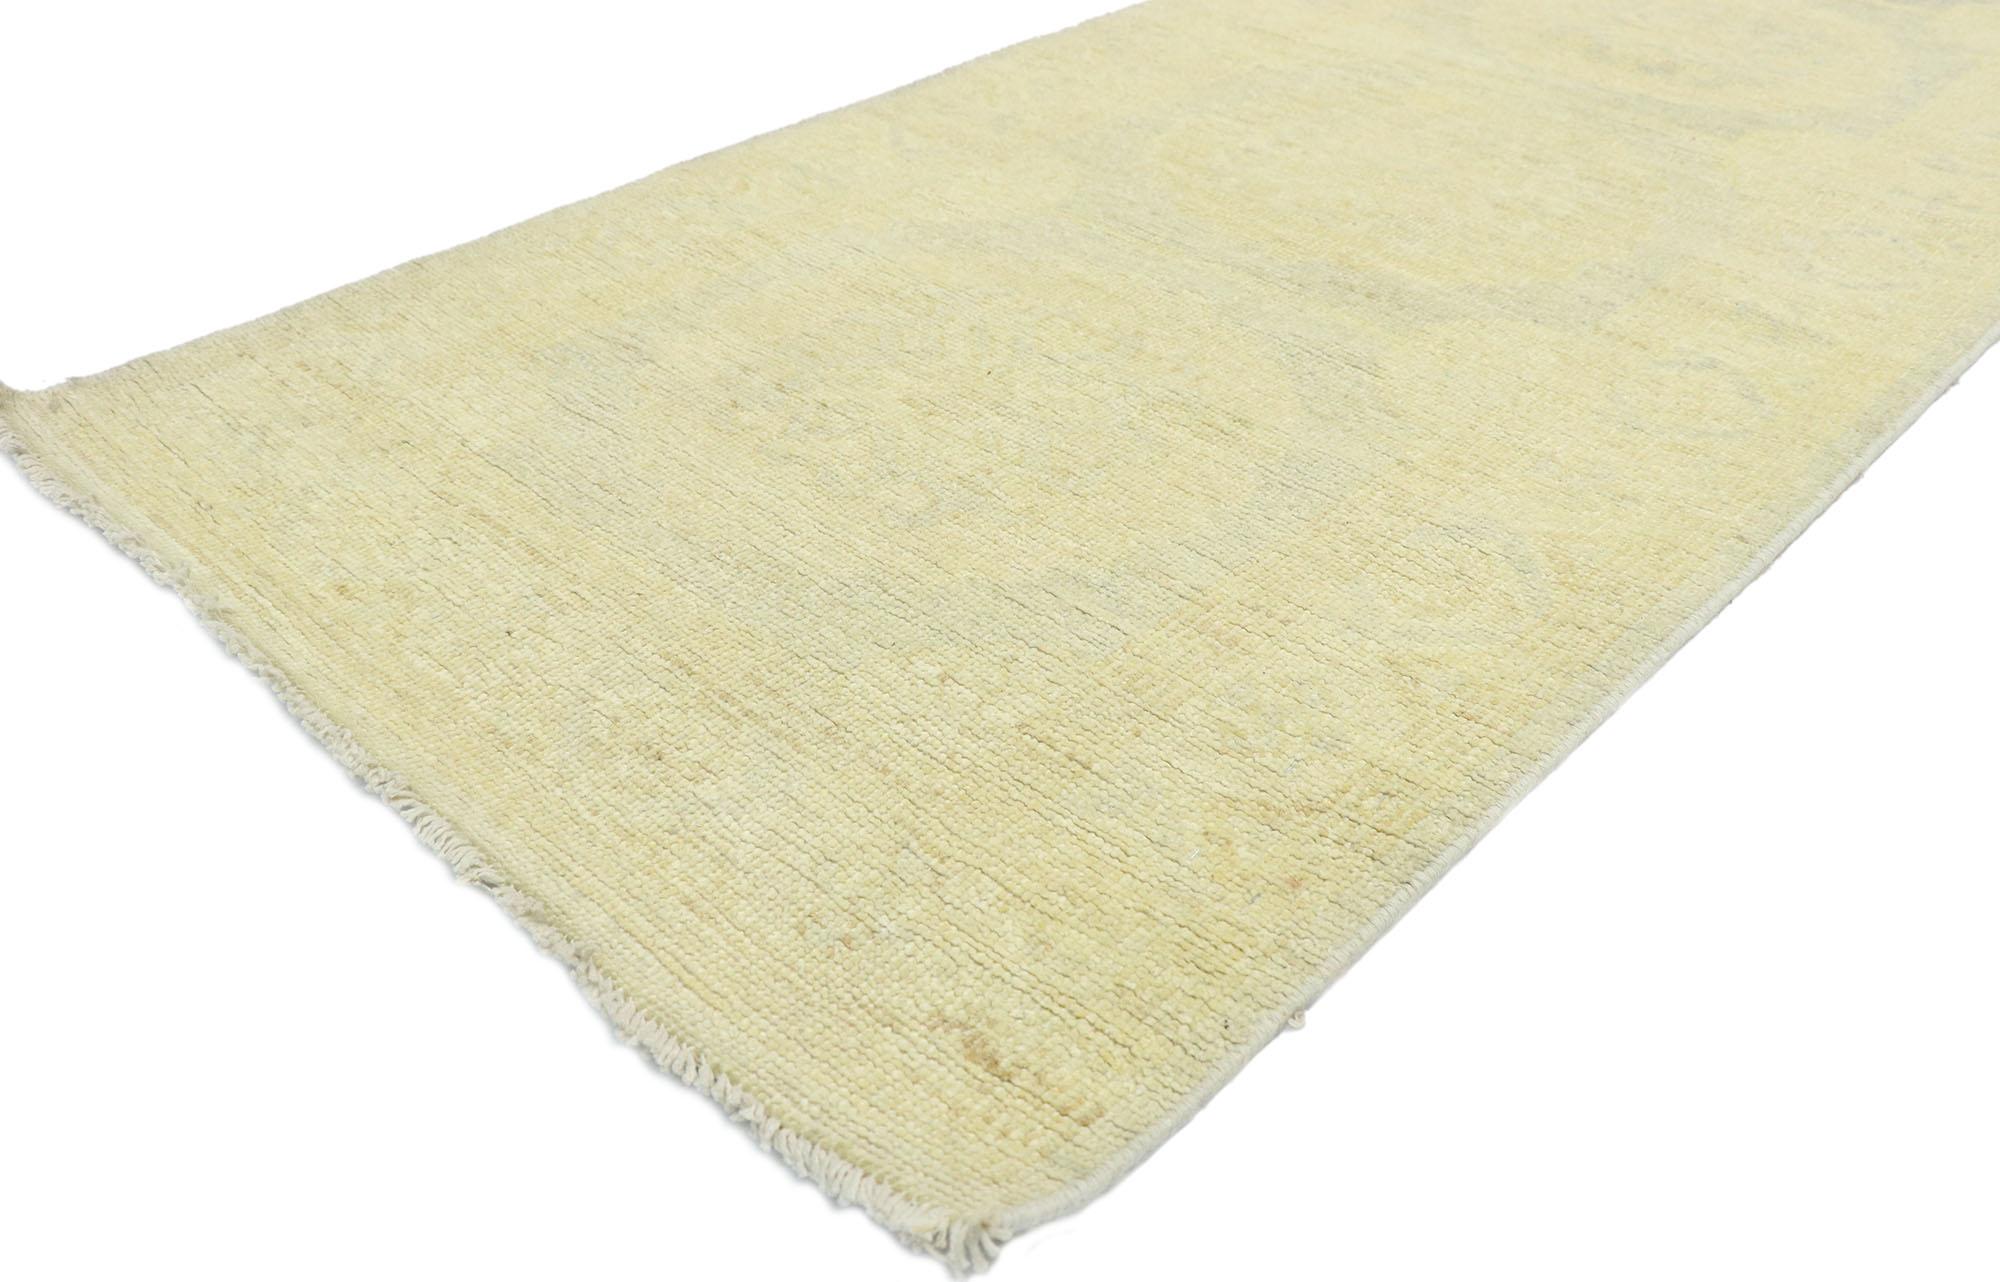 80217, new transitional Khotan style hallway runner with pomegranate design. Blending elements from the modern world with light and airy colors, this hand knotted wool transitional Khotan style runner charms with ease. The abrashed field features a